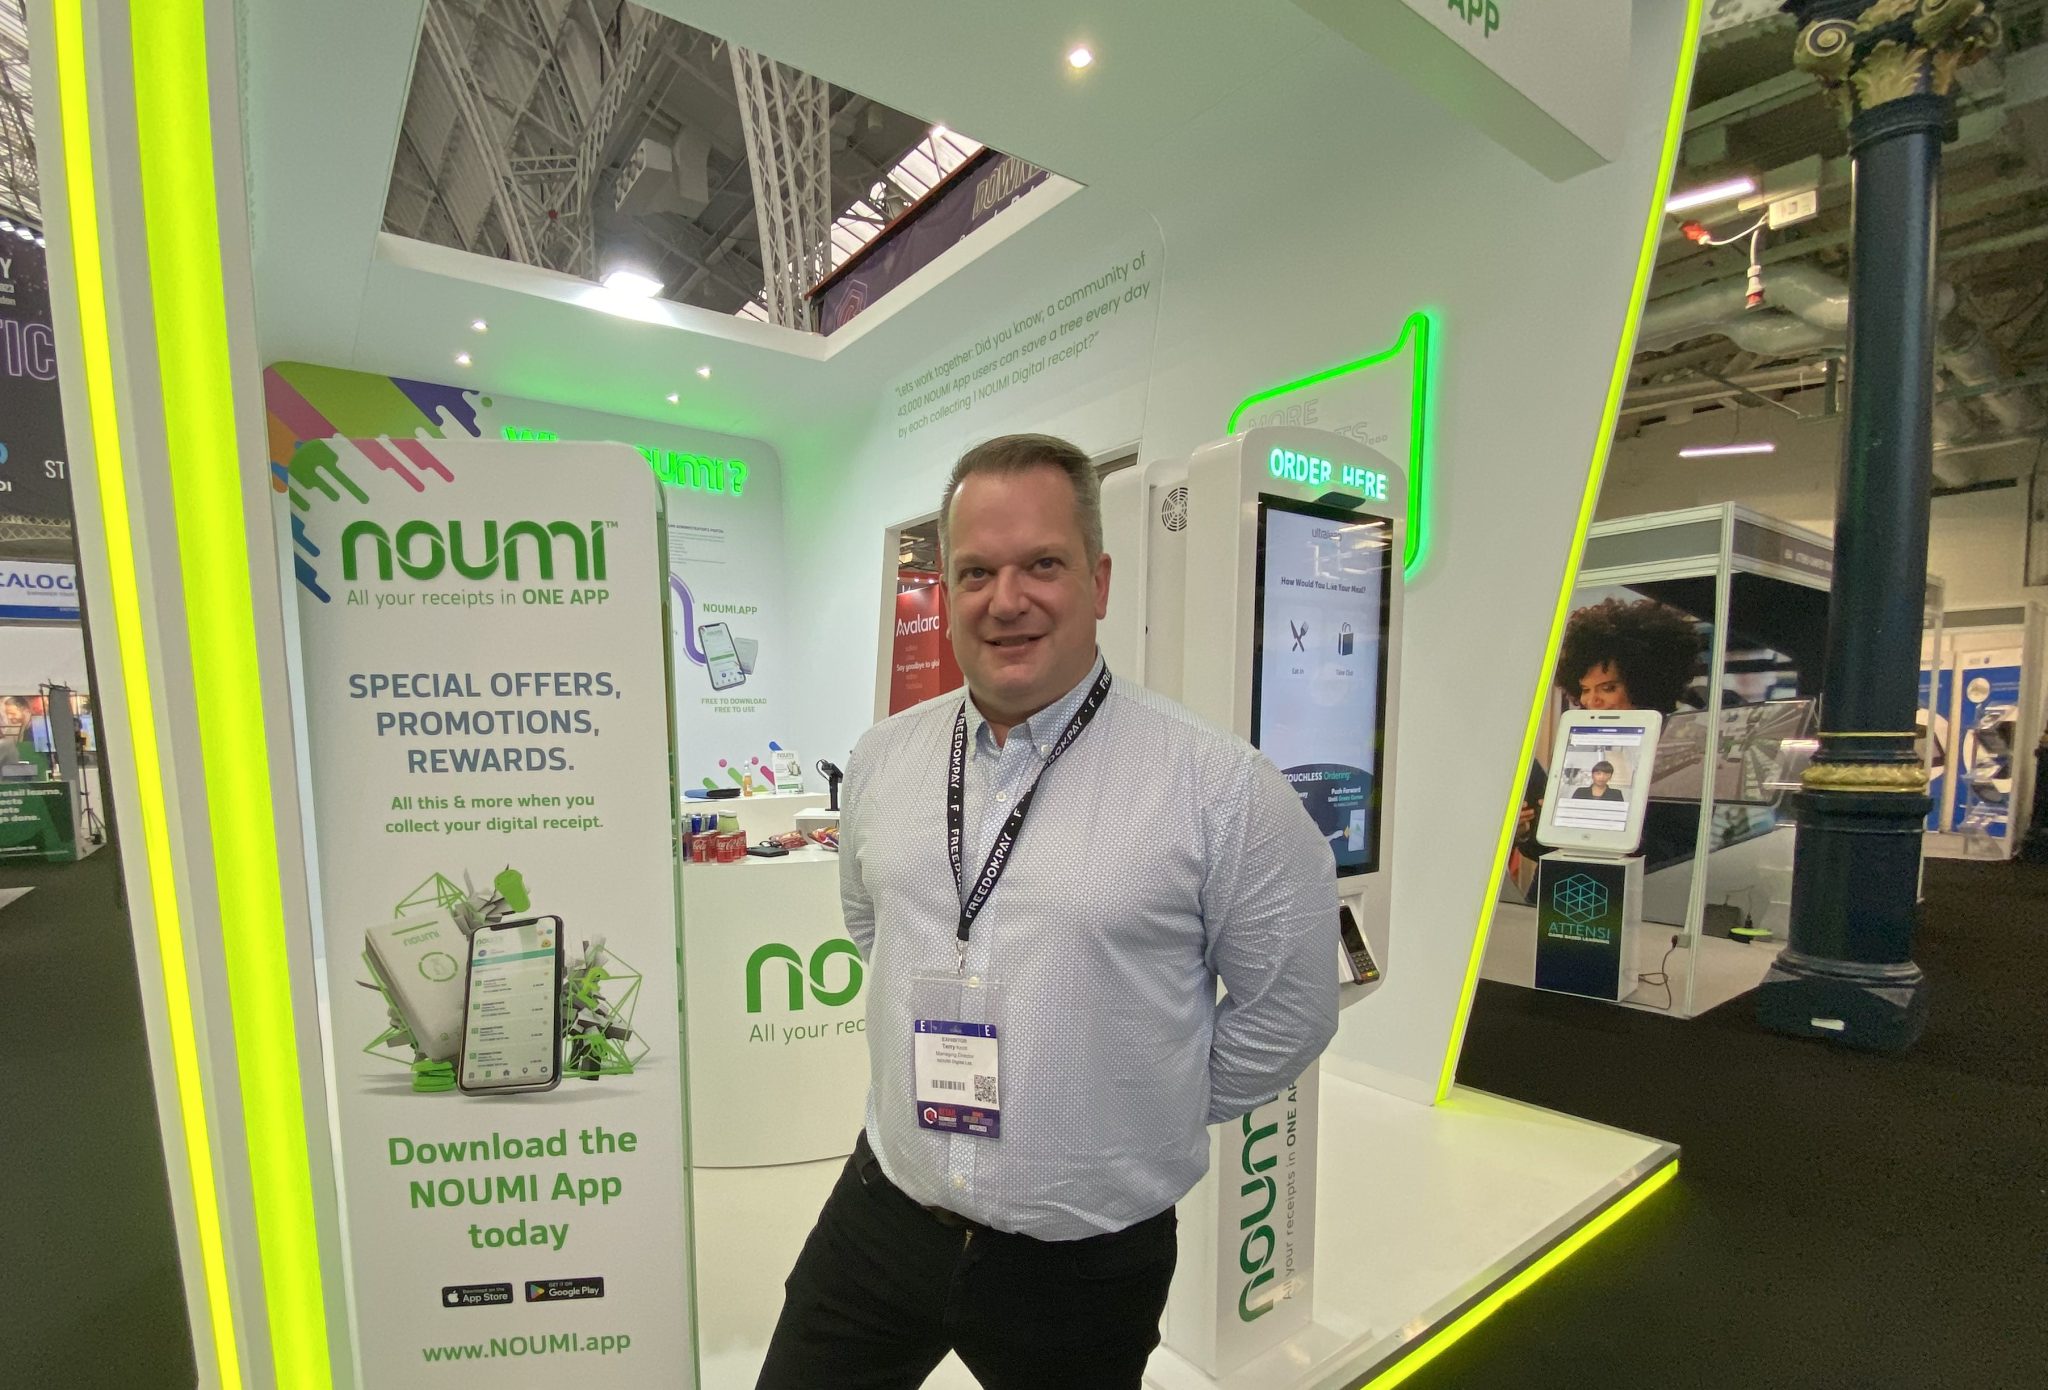 Terry Knott from NOUMI